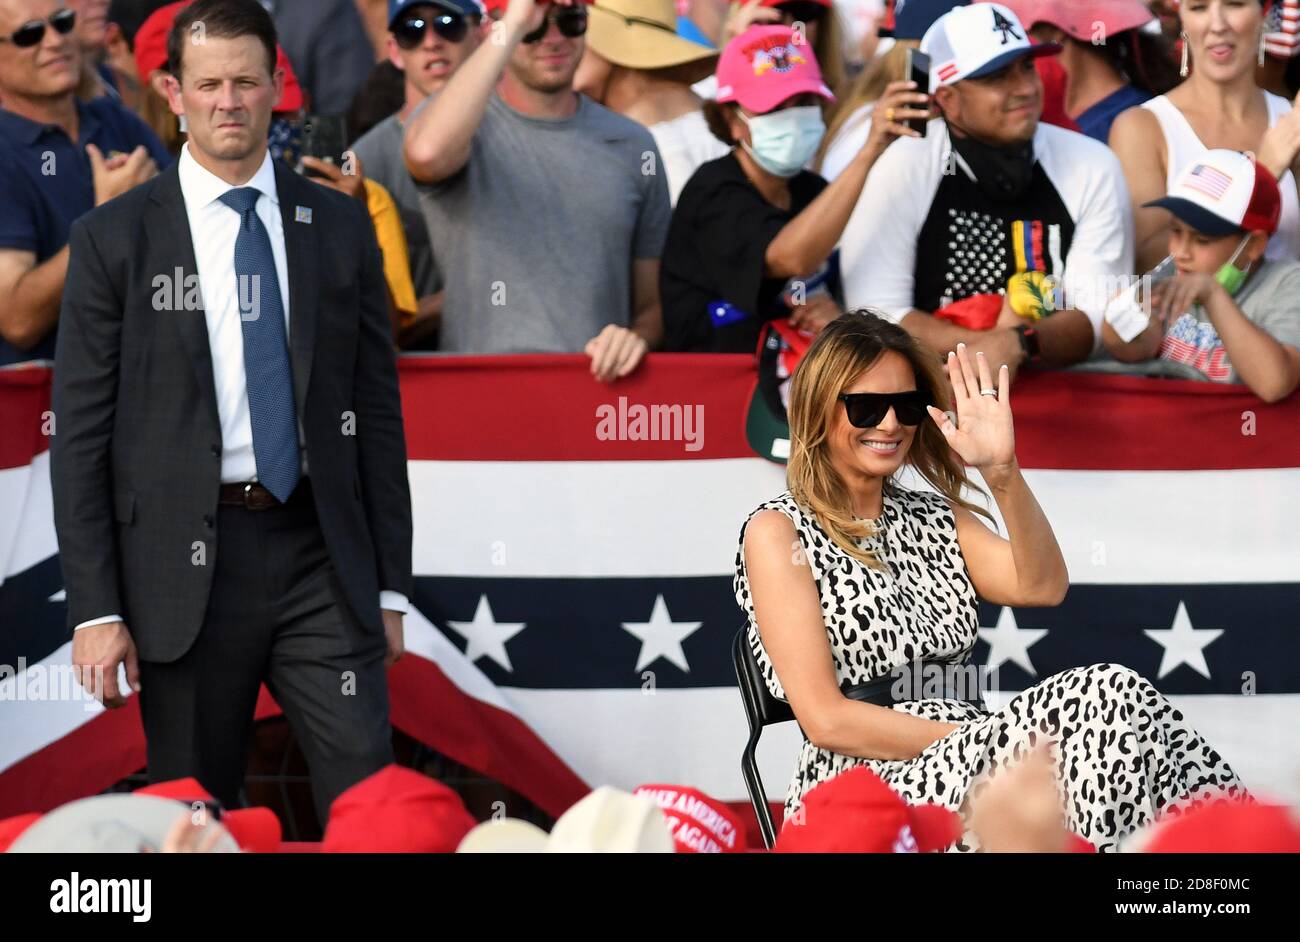 October 29, 2020 - Tampa, Florida, United States - First Lady Melania Trump listens while President Trump speaks at a campaign rally outside Raymond James Stadium on October 29, 2020 in Tampa, Florida. With 5 days until the November 3 election, Trump continues to campaign in swing states against Democratic presidential nominee Joe Biden. (Paul Hennessy/Alamy) Credit: Paul Hennessy/Alamy Live News Stock Photo